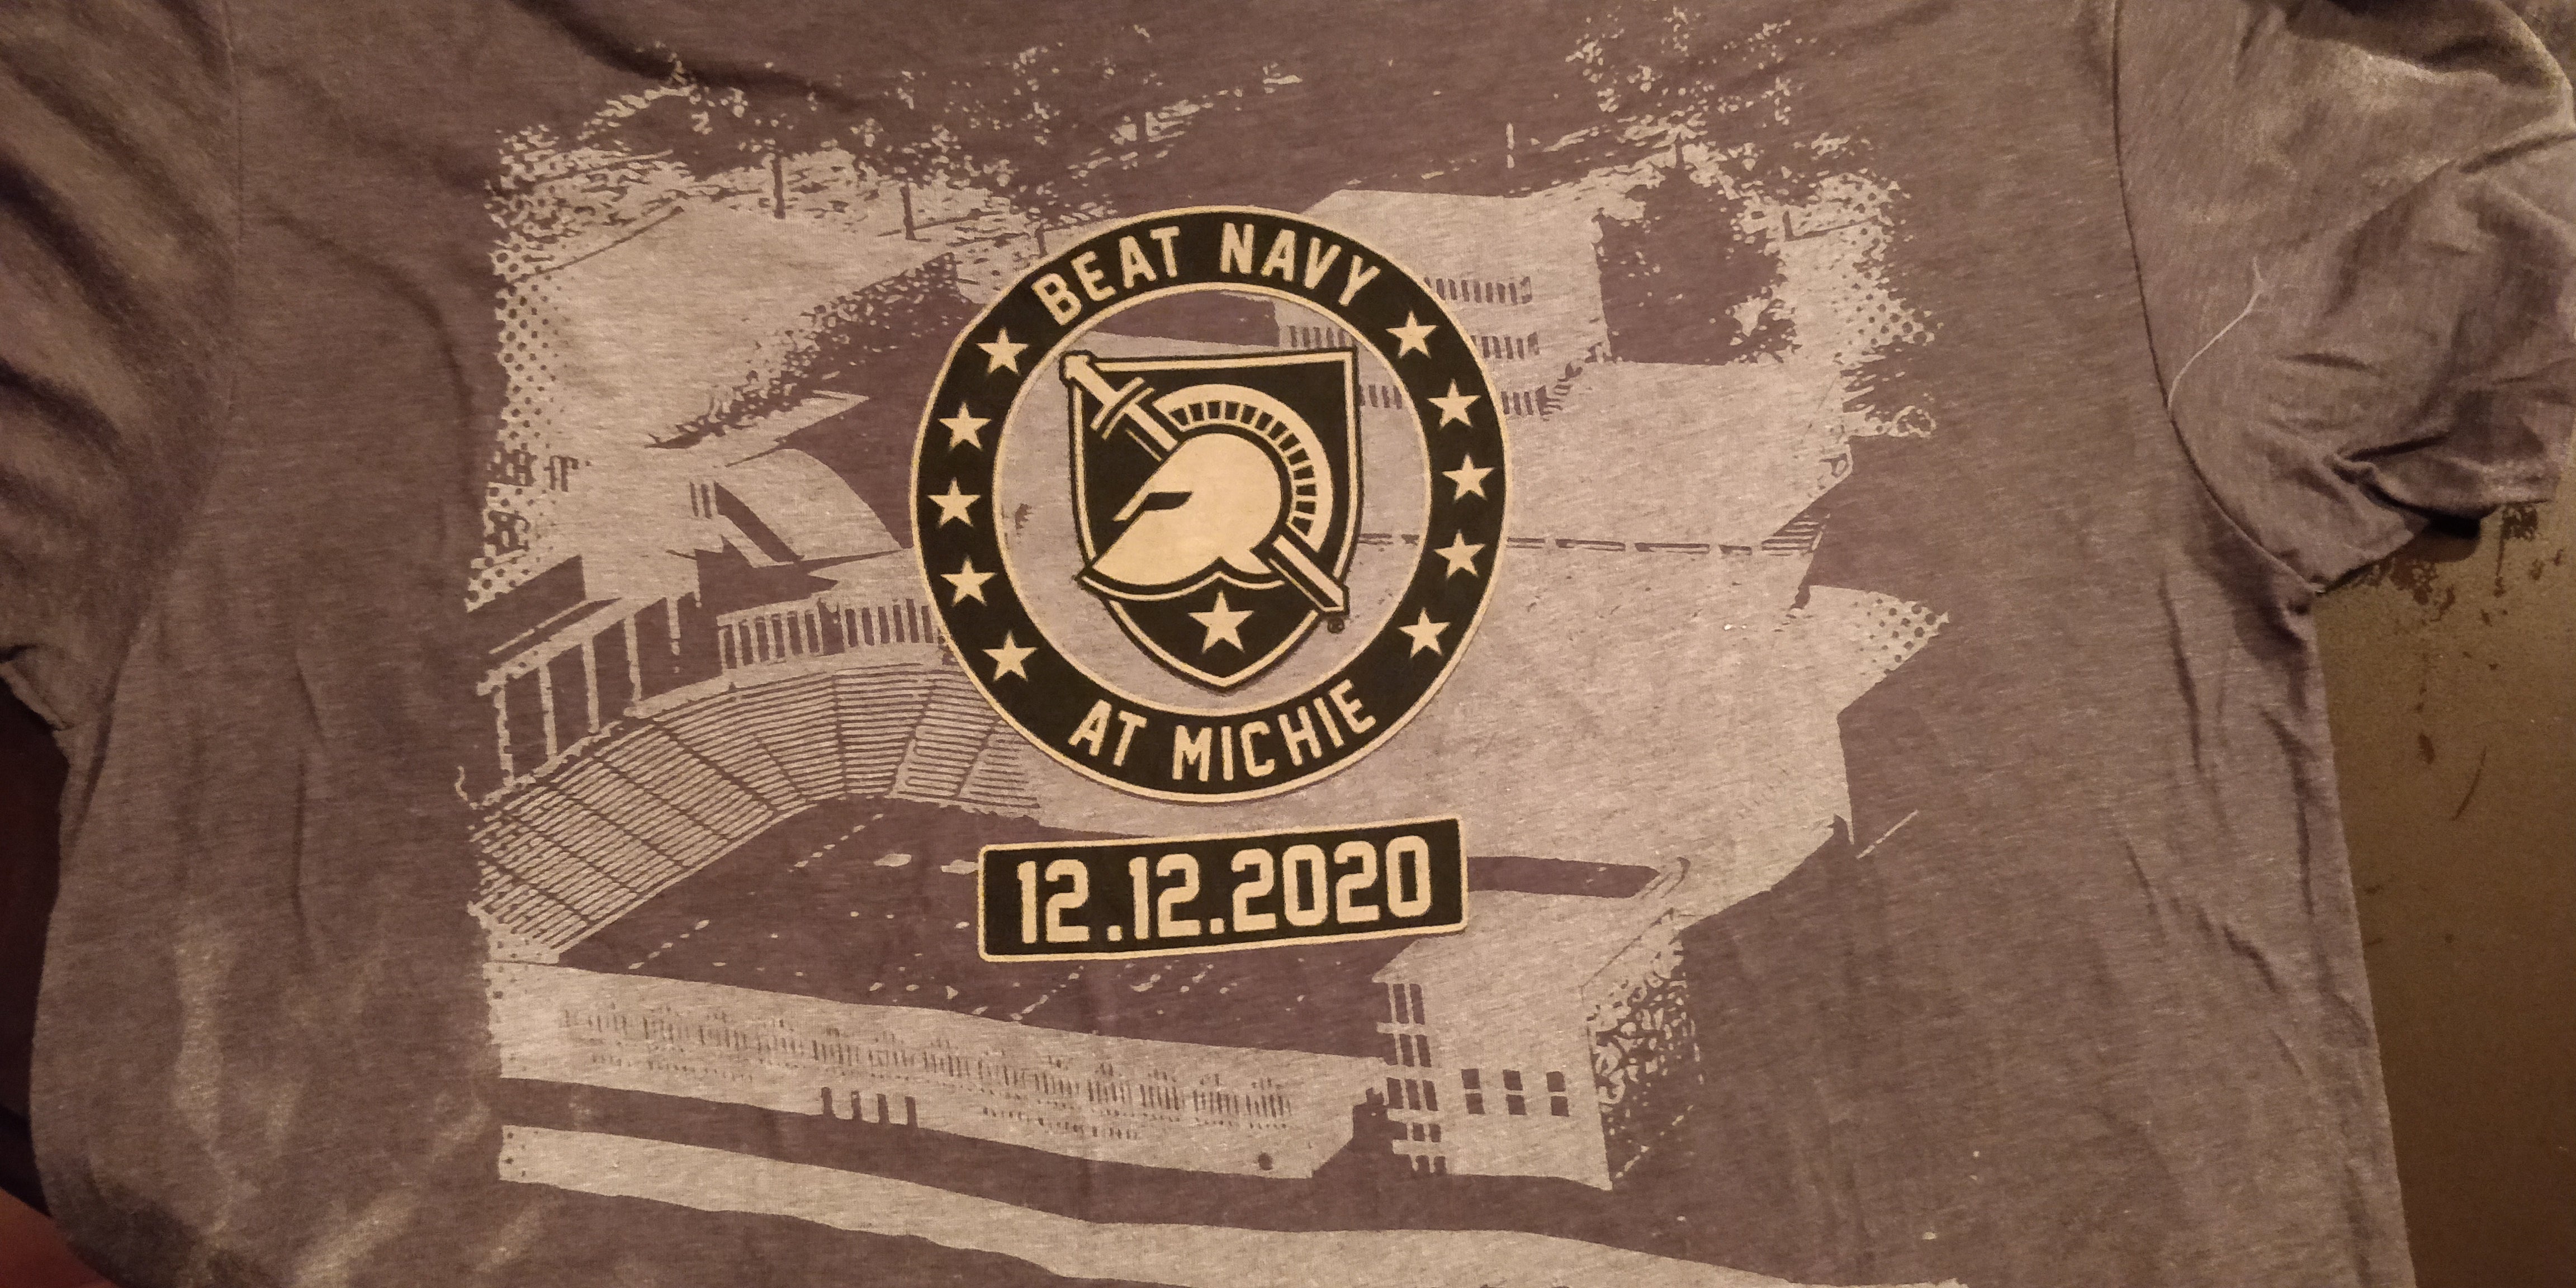 Beat Navy at Michie 2020 Sweat Activated Tee